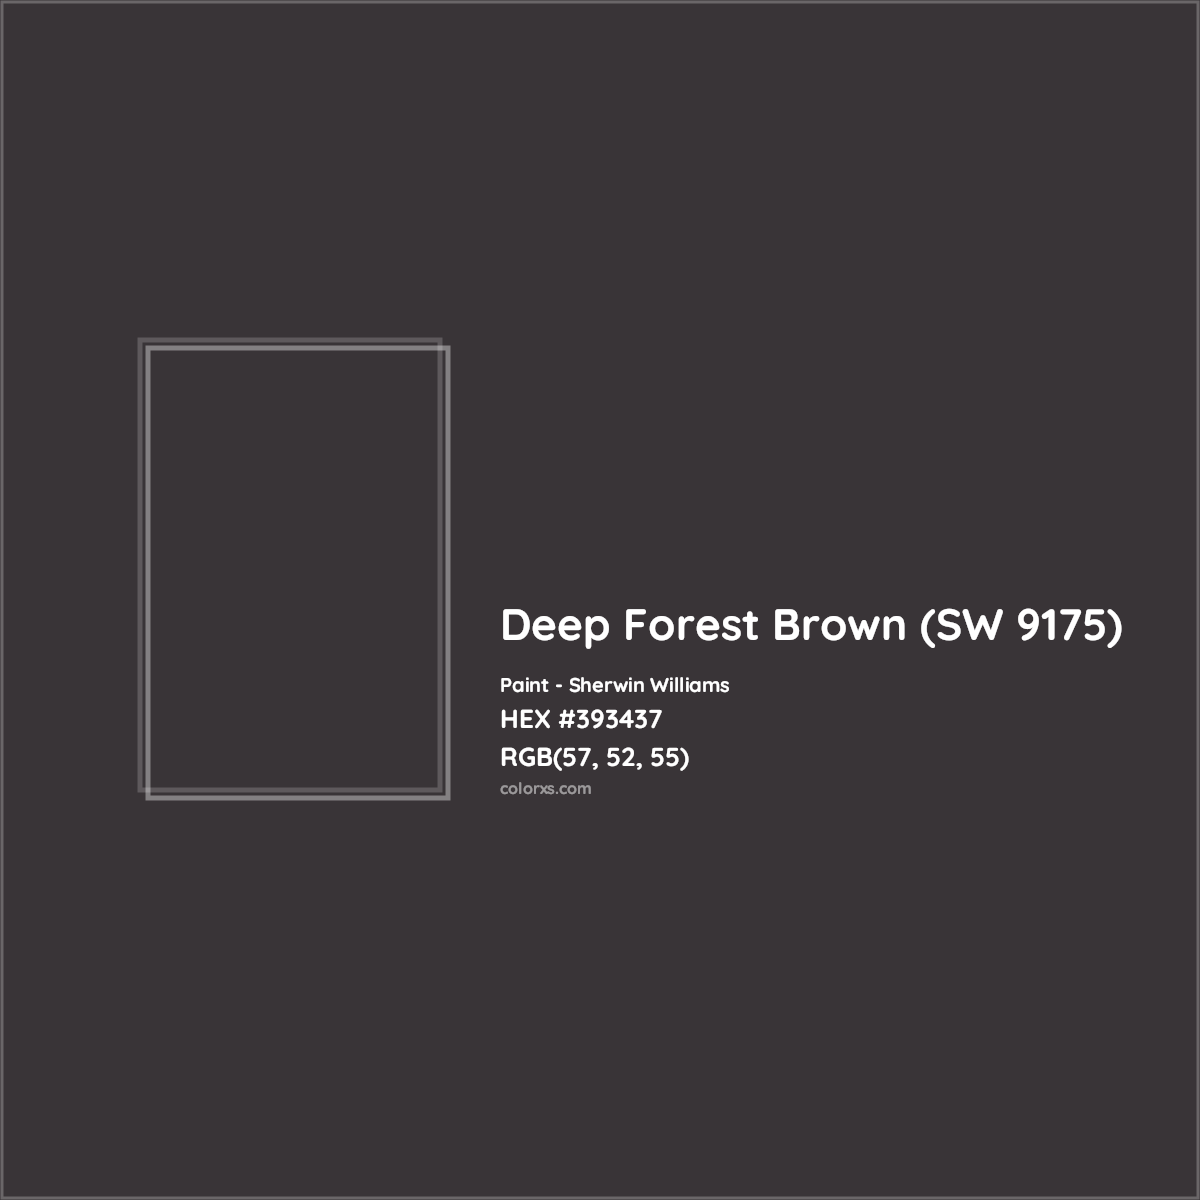 HEX #393437 Deep Forest Brown (SW 9175) Paint Sherwin Williams - Color Code